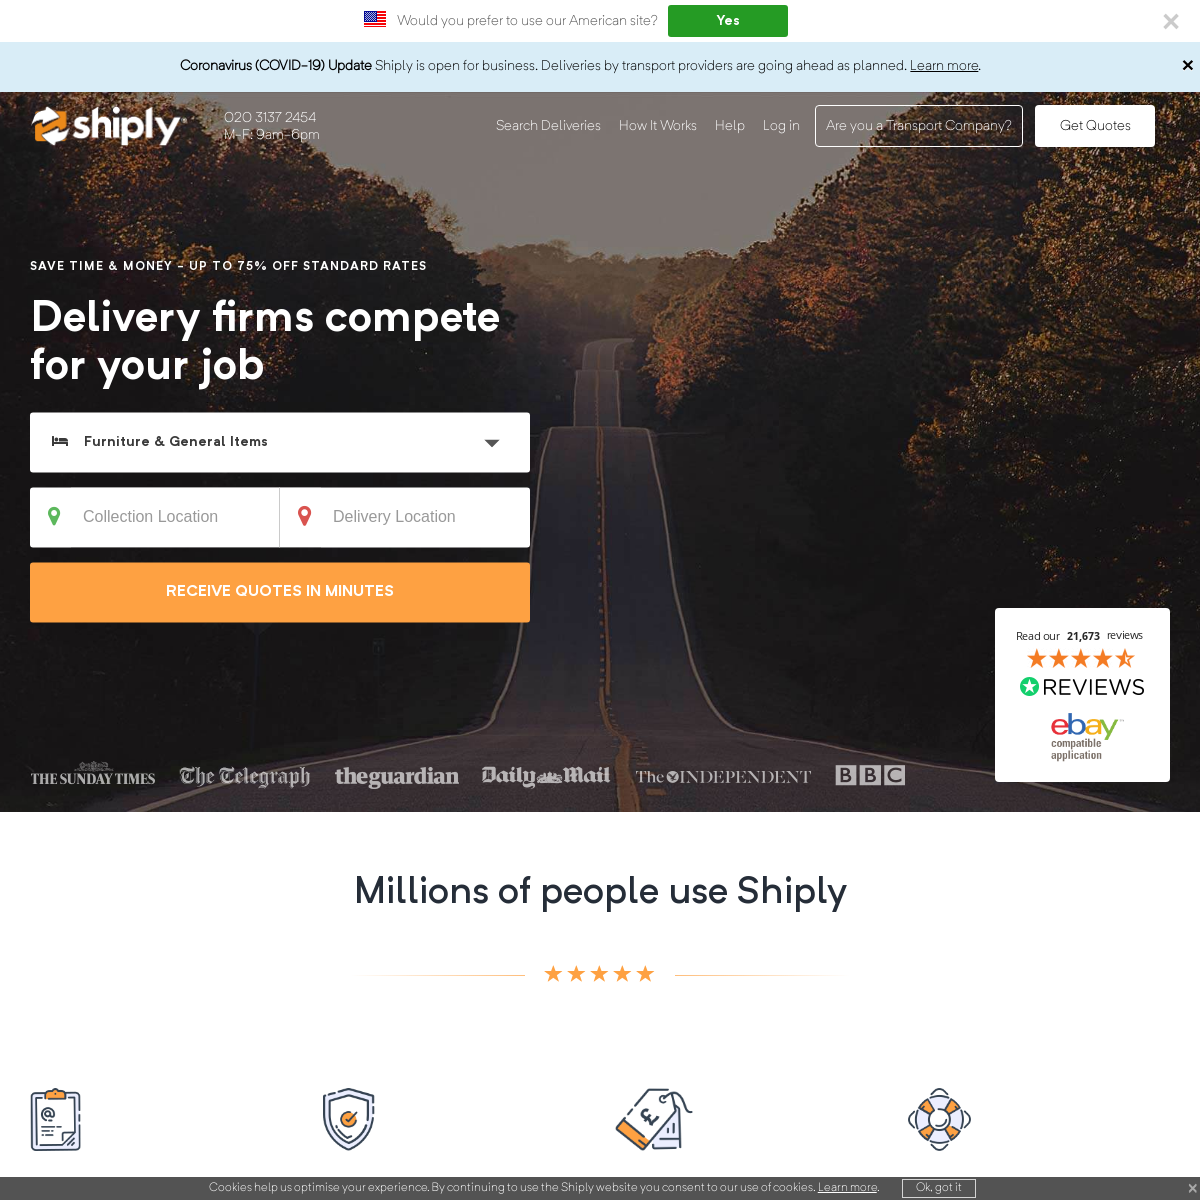 A complete backup of shiply.com